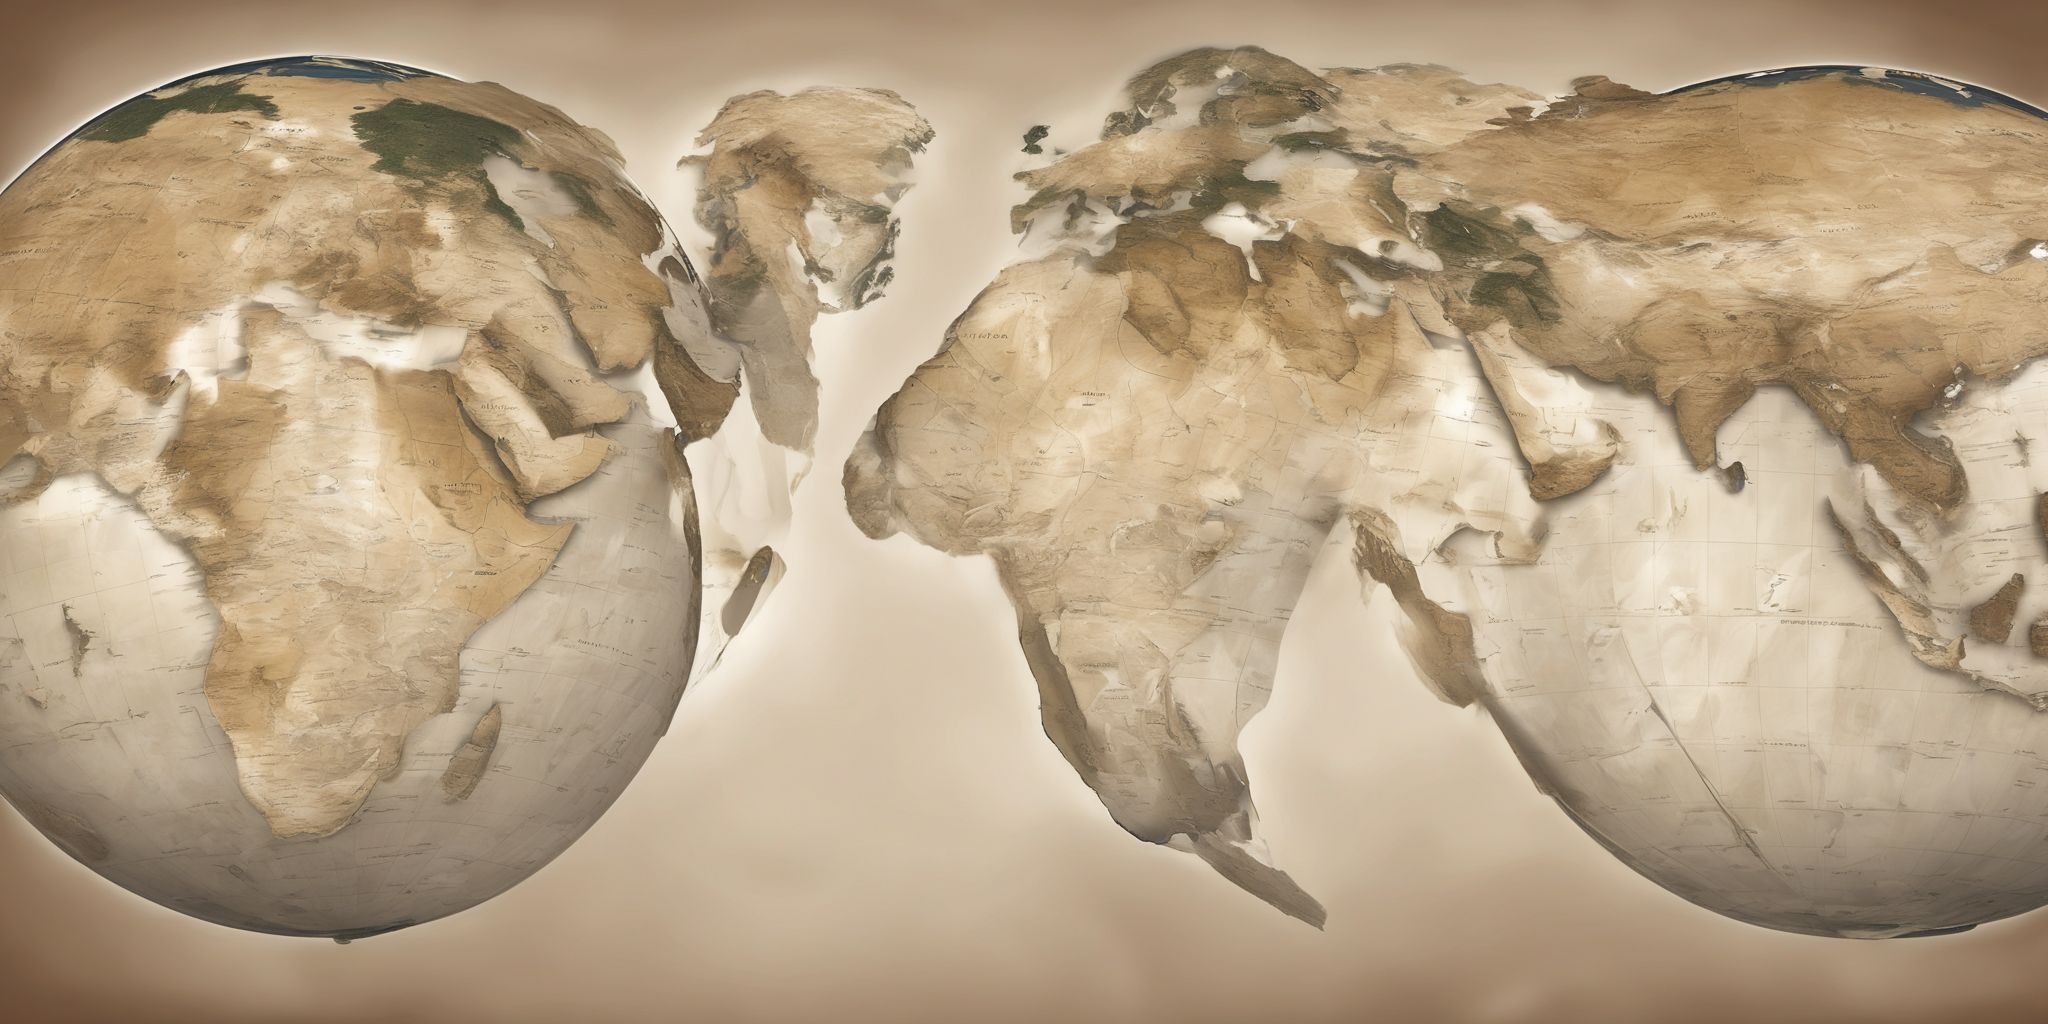 Worldwide: Globe  in realistic, photographic style